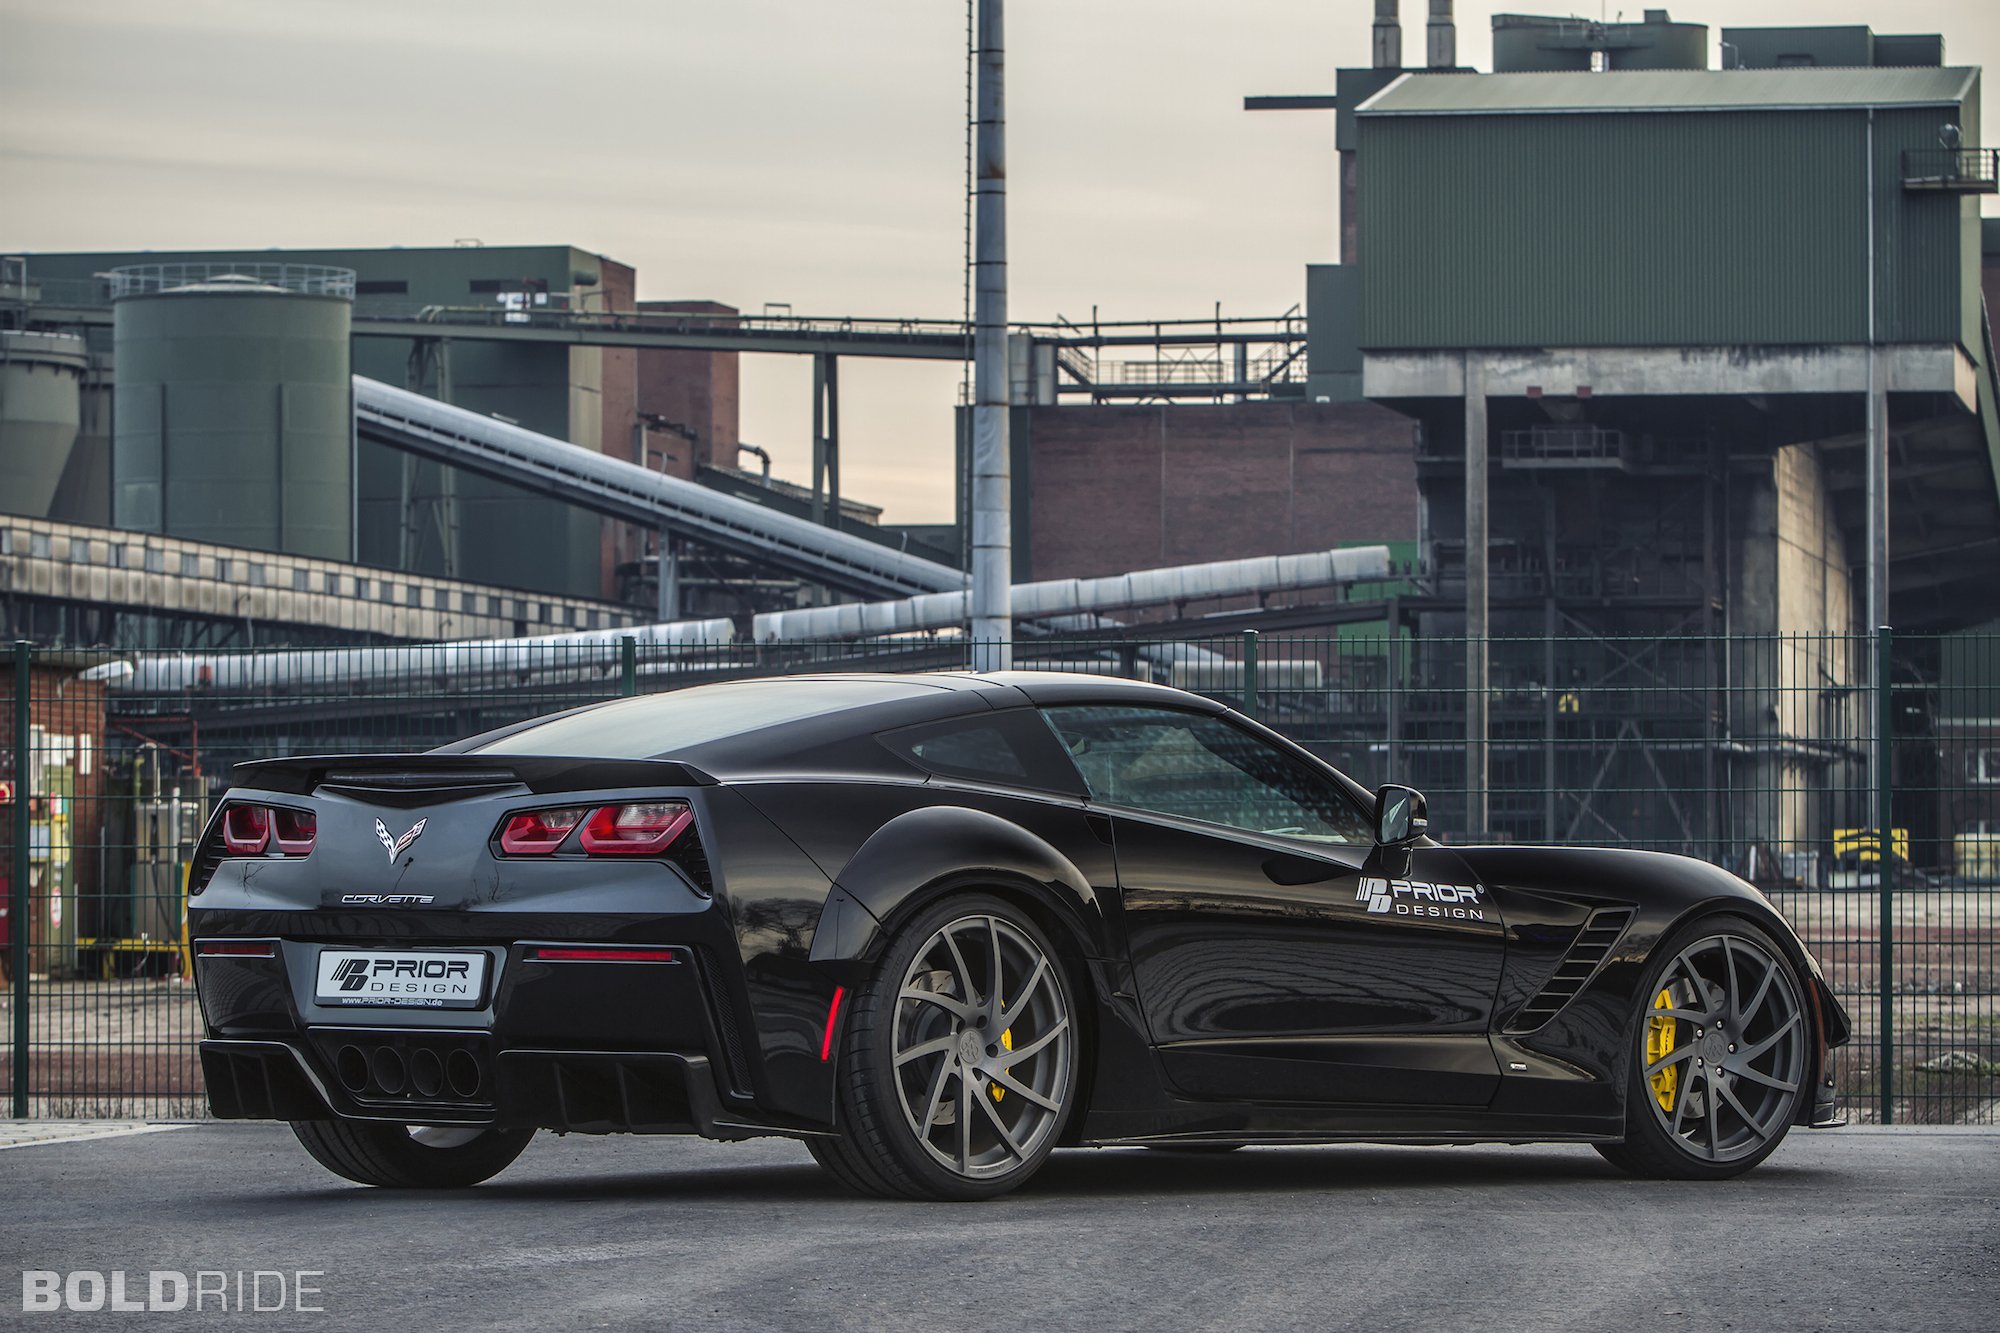 2015, Prior design, Chevrolet, Corvette, Stingray, Pdr700, Muscle, Tuning, Supercar, Sting, Ray Wallpaper